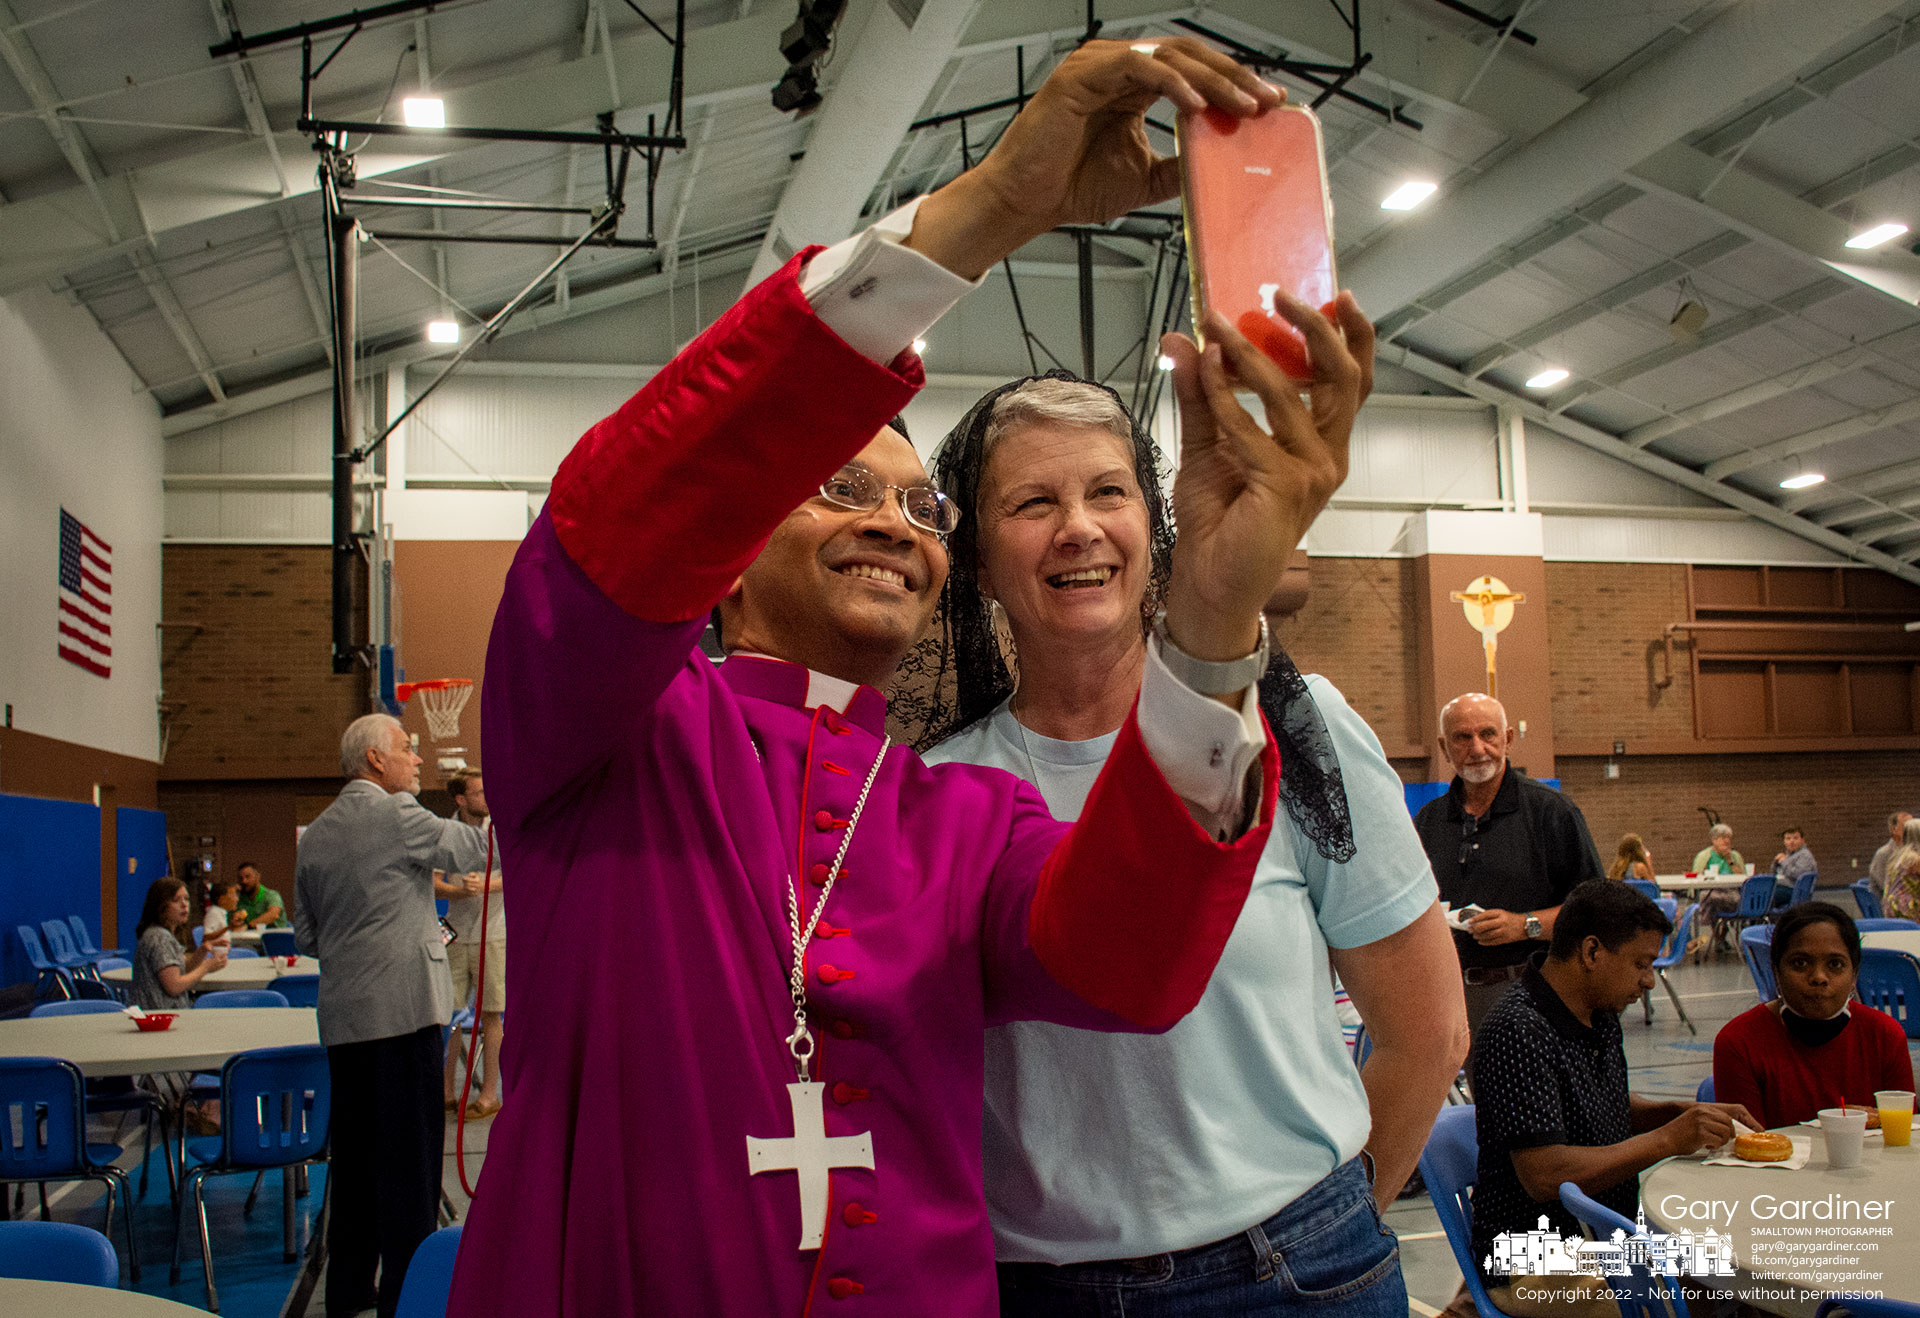 Columbus Bishop Earl Fernandes uses a parishioner's phone to shoot a selfie with her during St. Paul's donut Sunday gathering after Mass. My Final Photo for June 26, 2022.